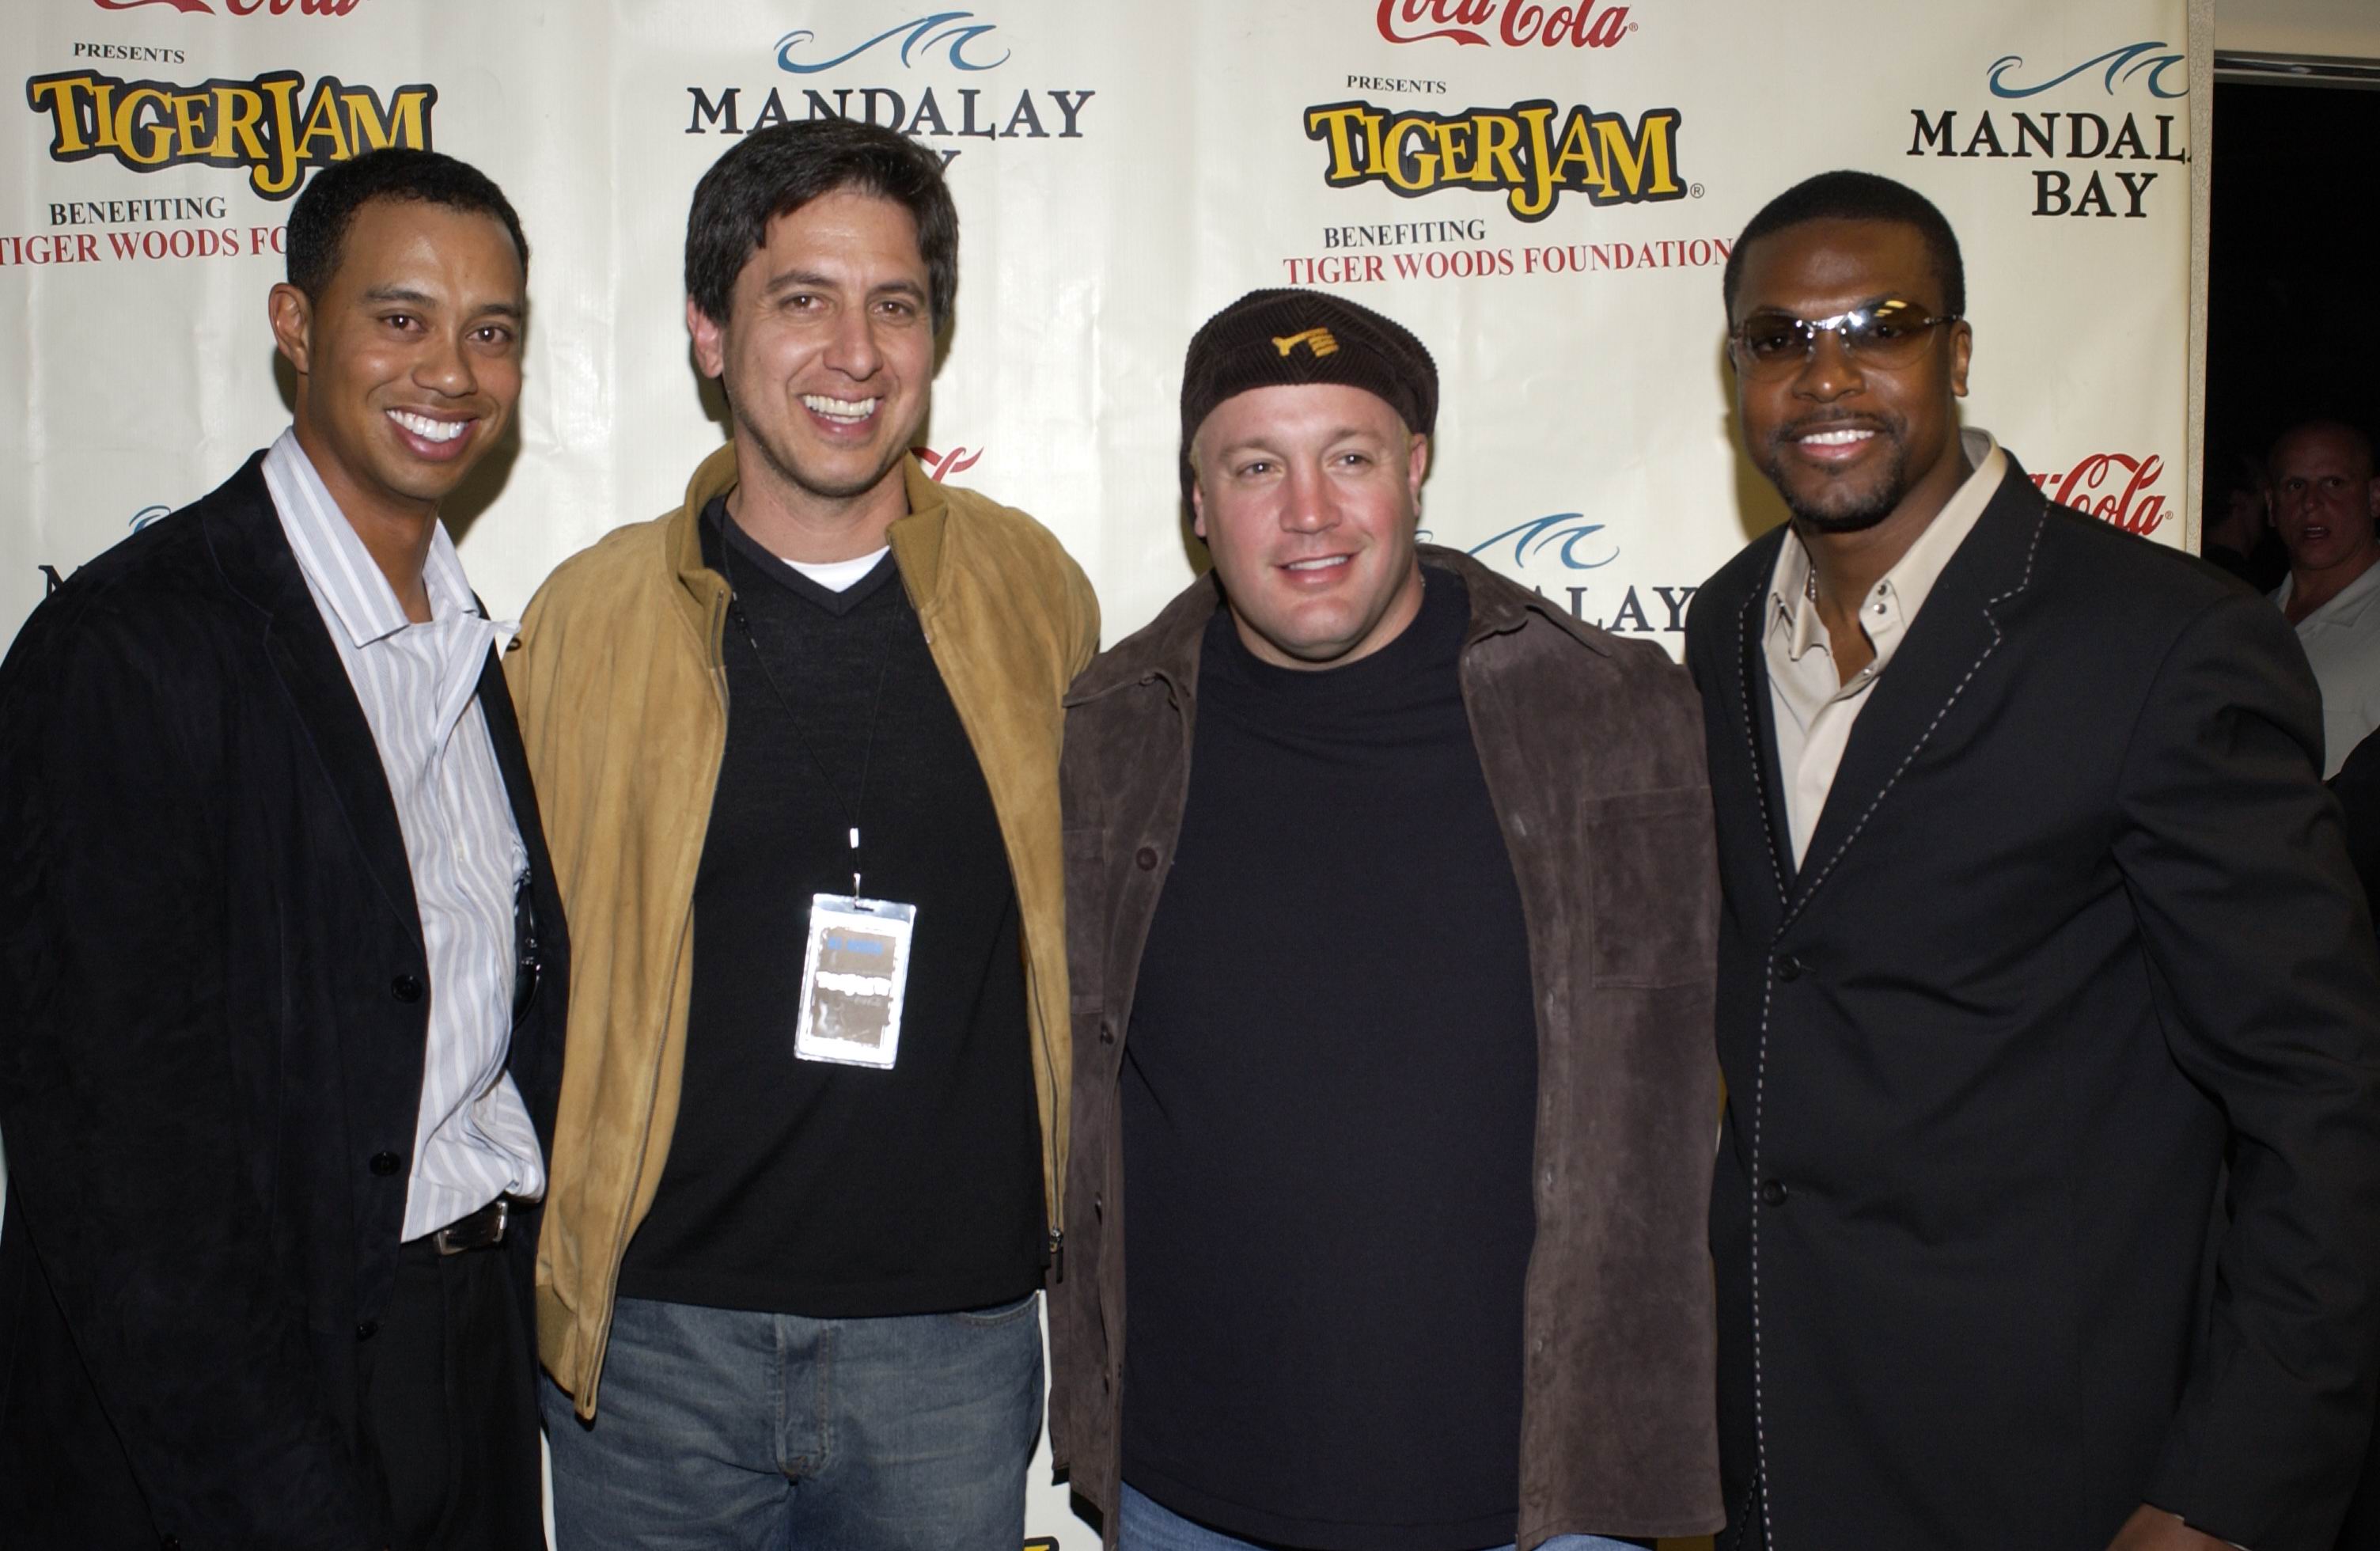 Tiger Woods, Ray Romano, Kevin James and Chris Tucker at Tiger Jam in 2003